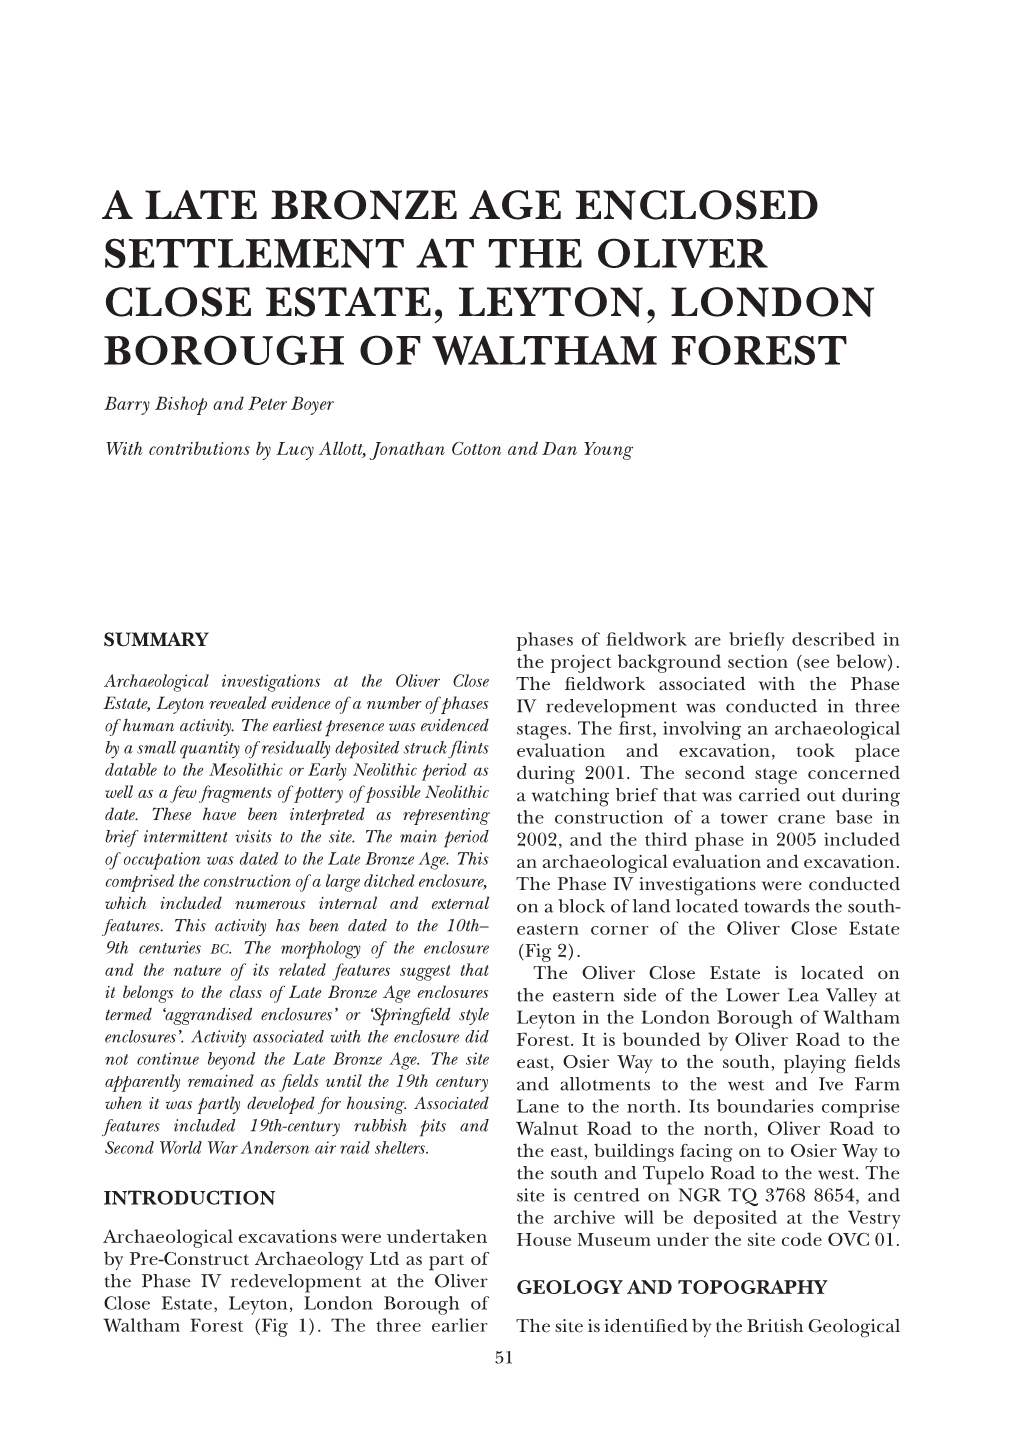 A Late Bronze Age Enclosed Settlement at the Oliver Close Estate, Leyton, London Borough of Waltham Forest